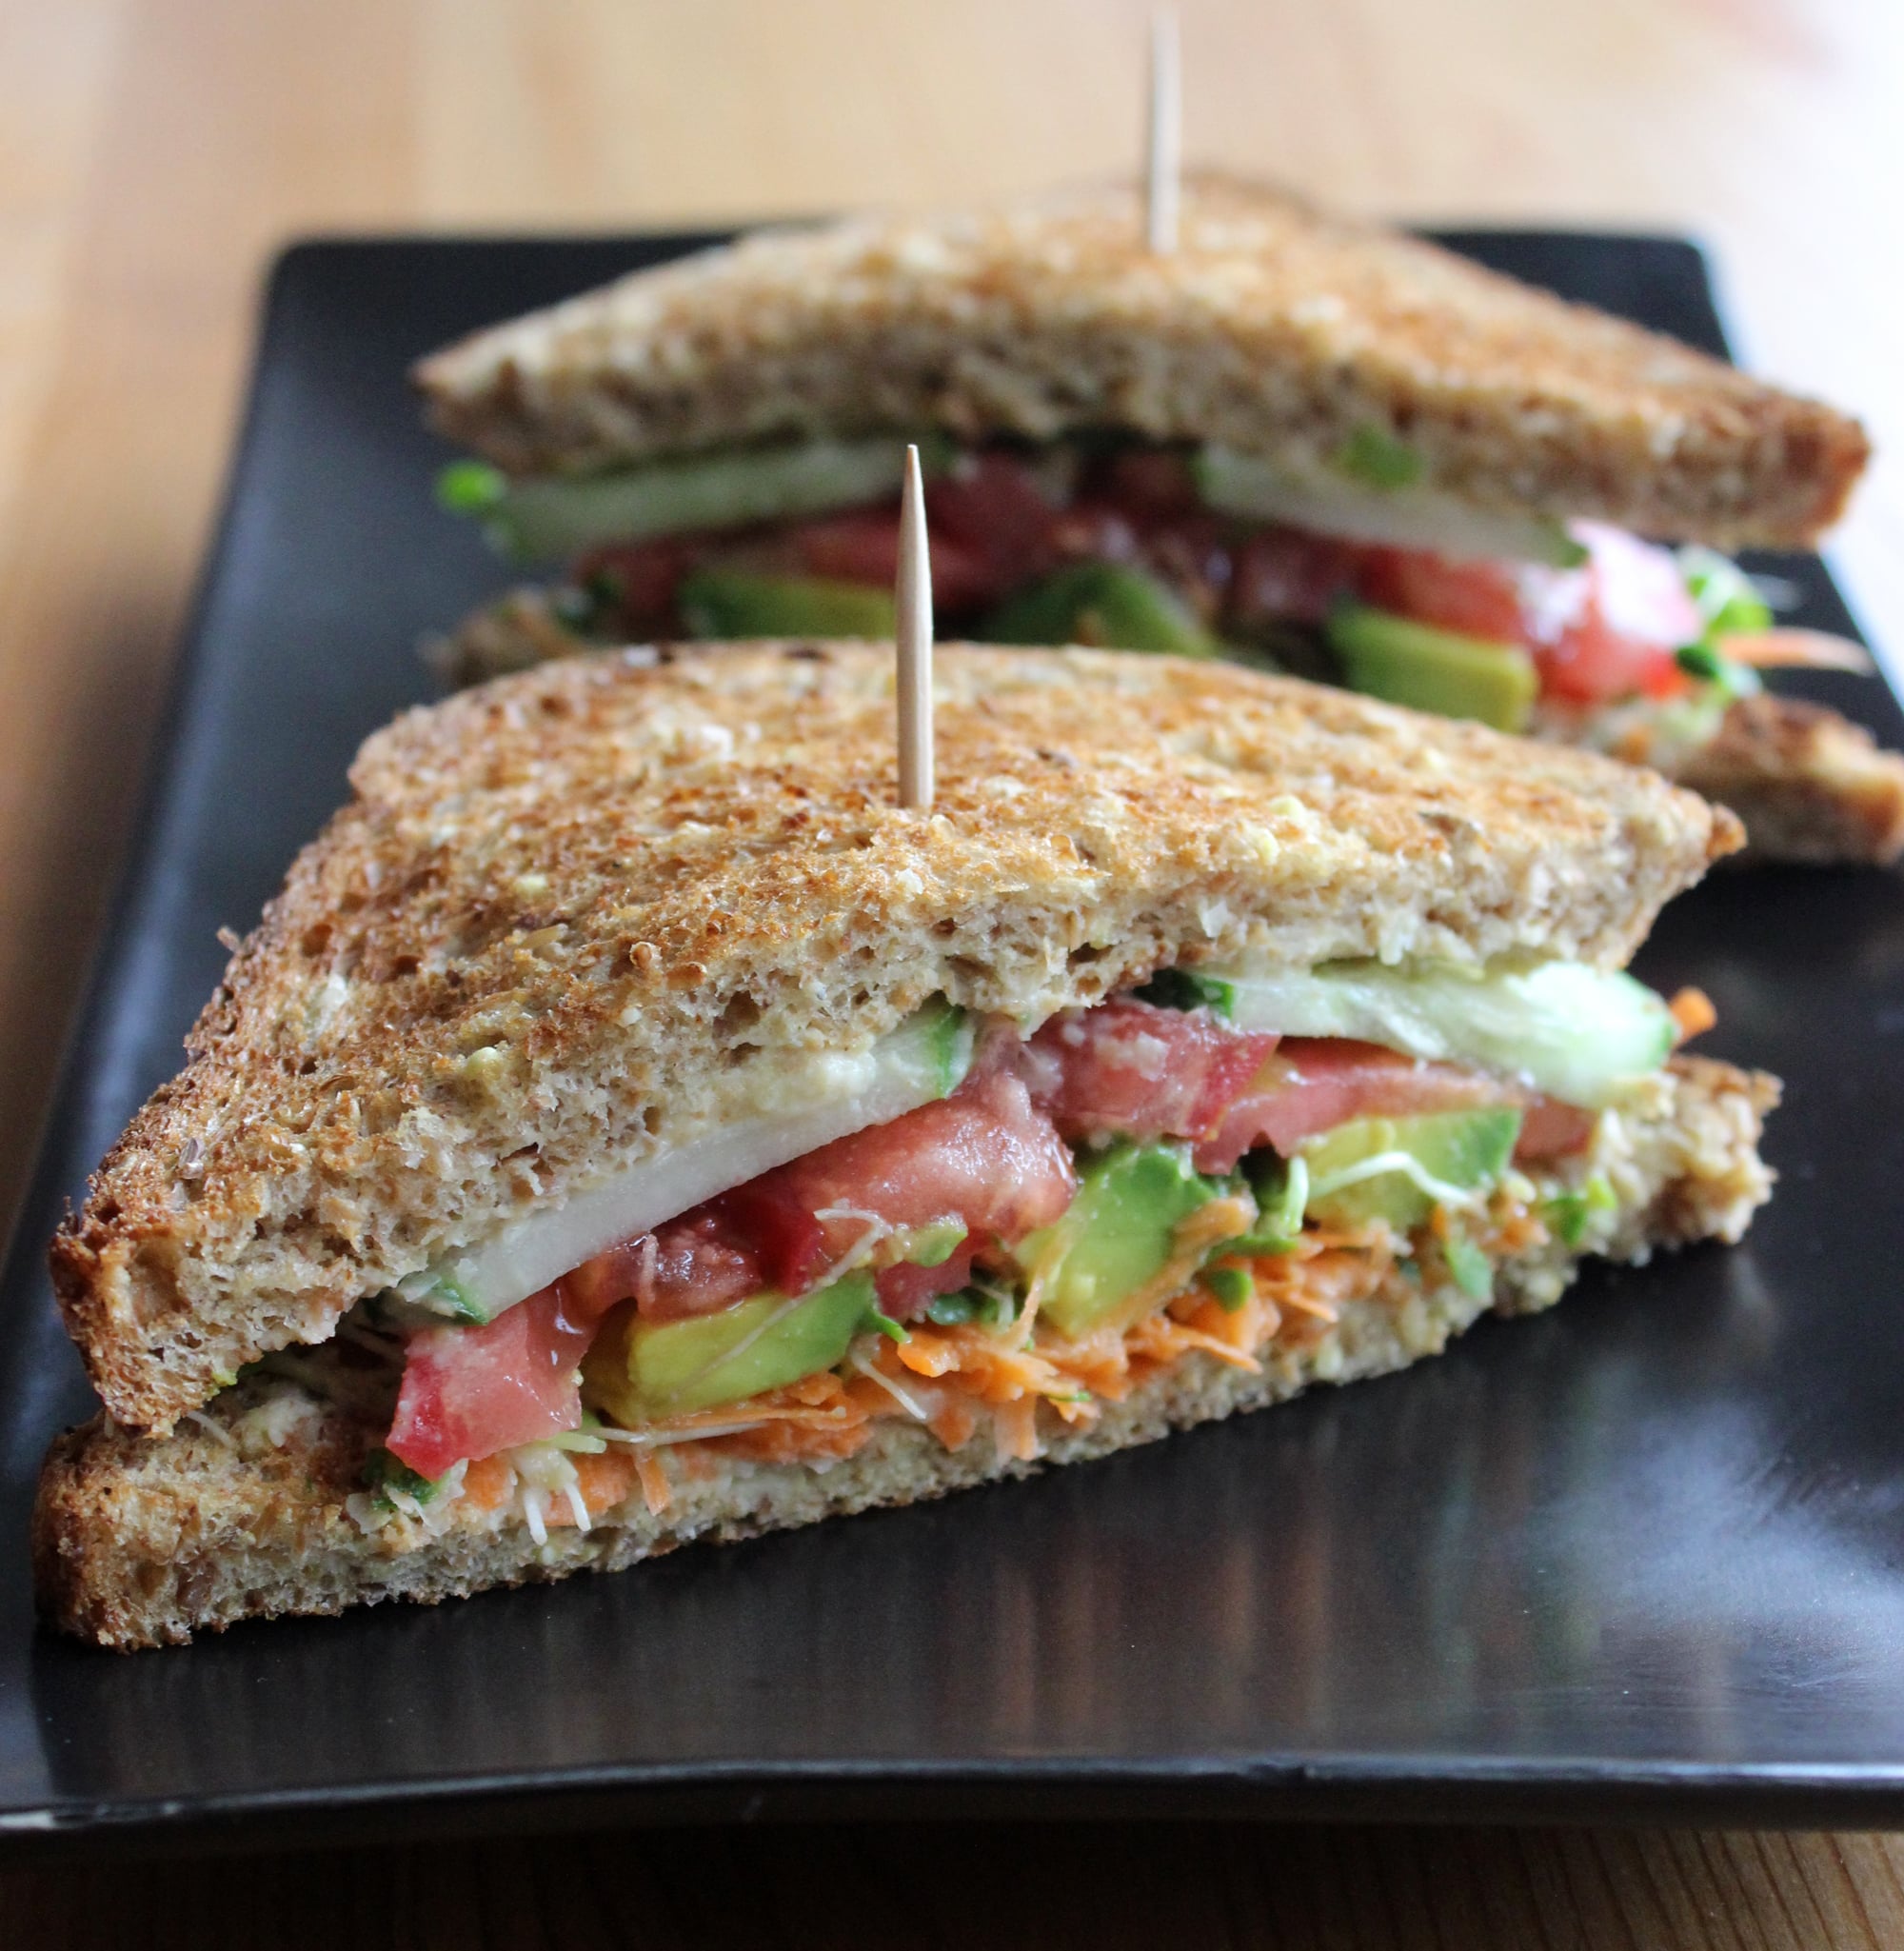 Healthy lunch ideas for work that aren't sandwiches